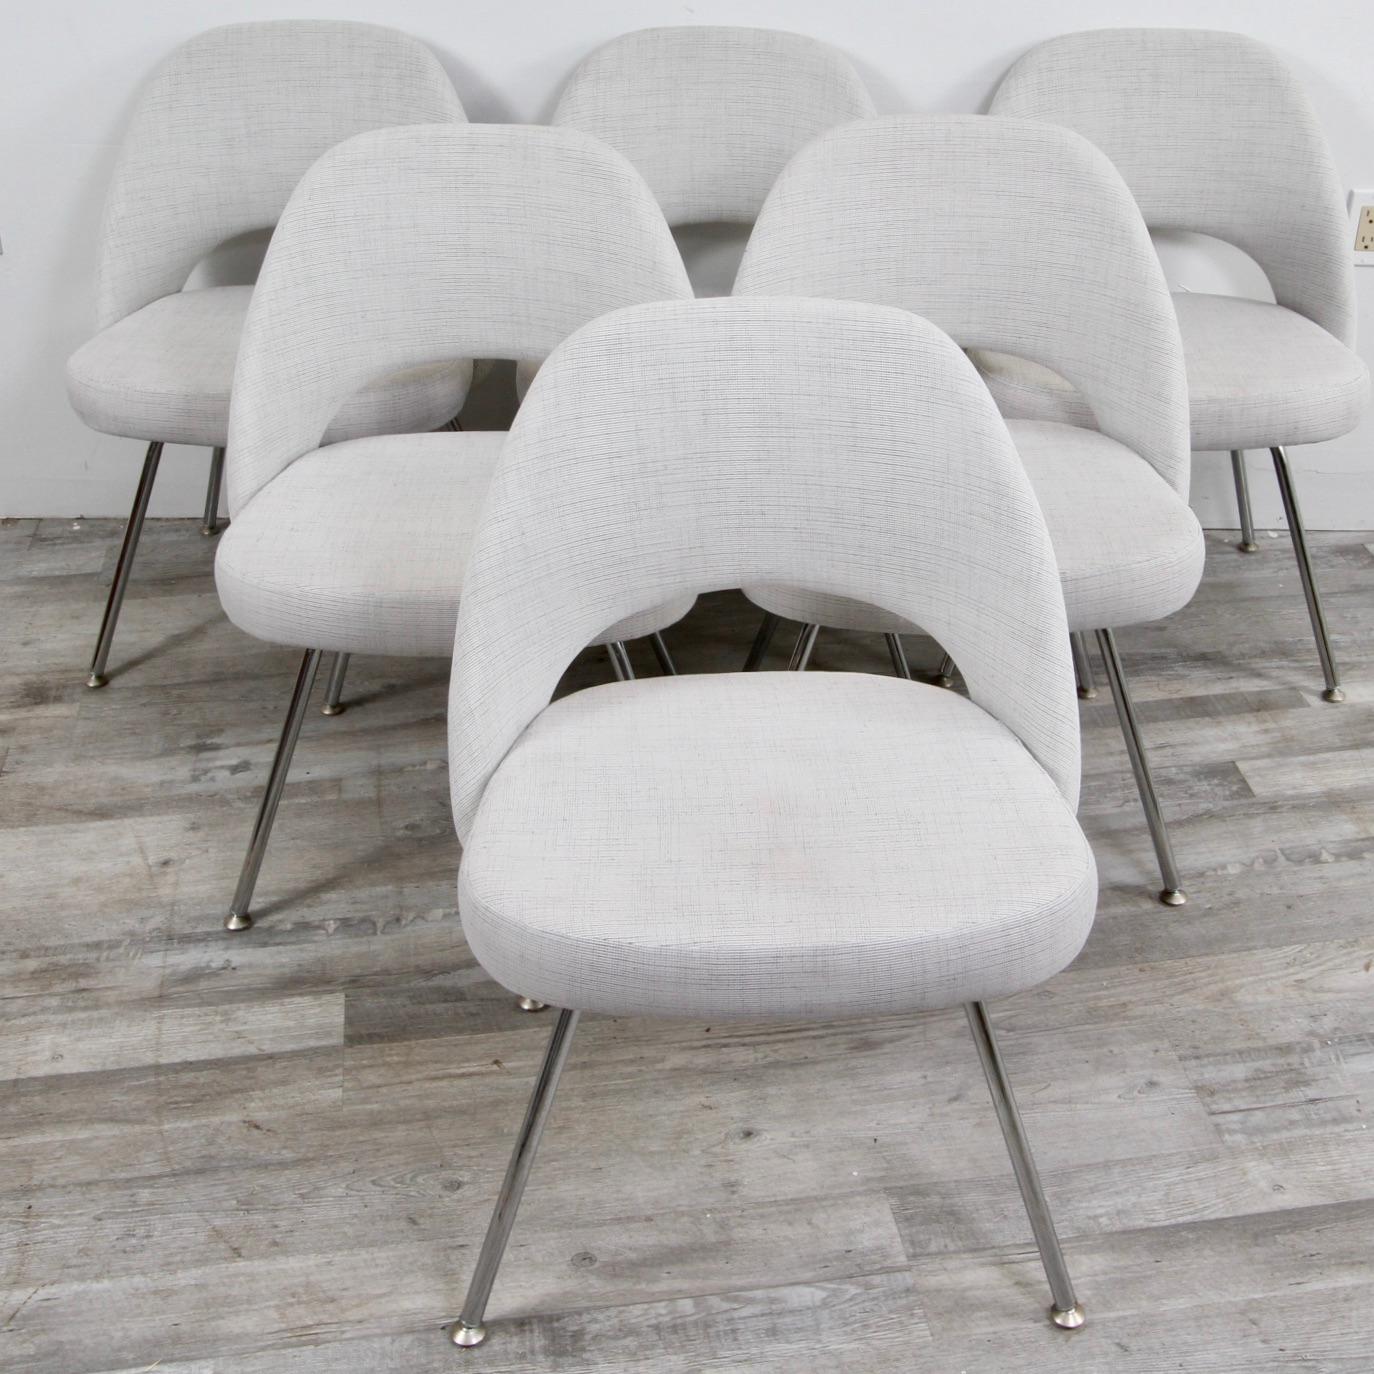 Iconic dining/ office chairs from Knoll that are as clean as the day they were delivered.